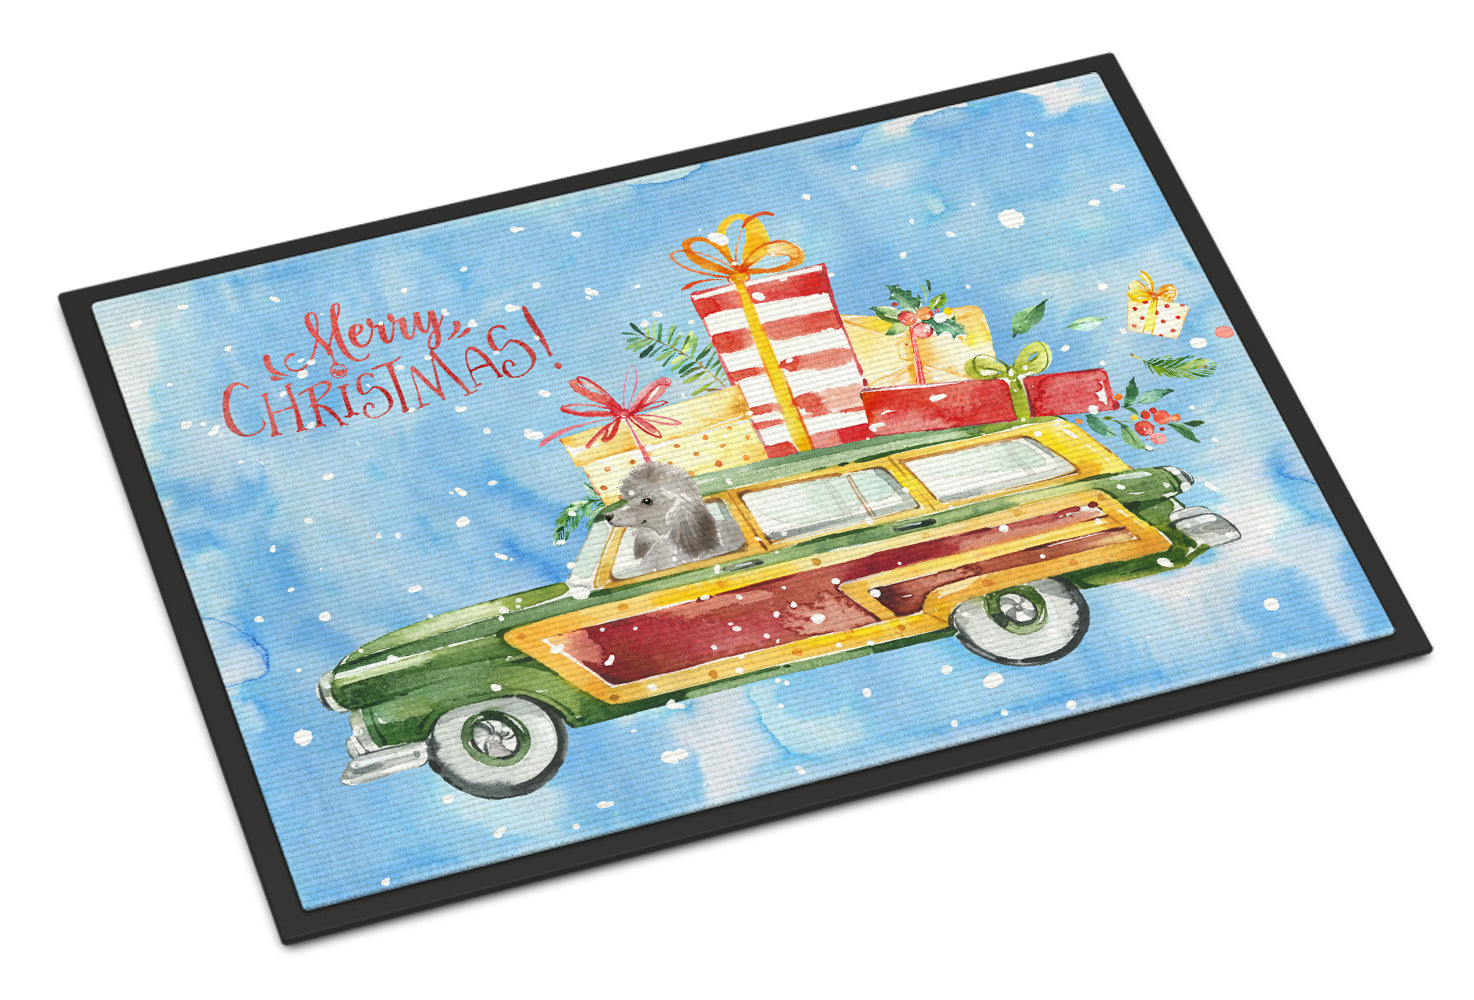 Merry Christmas Silver Poodle Indoor or Outdoor Mat 18x27 CK2457MAT - the-store.com